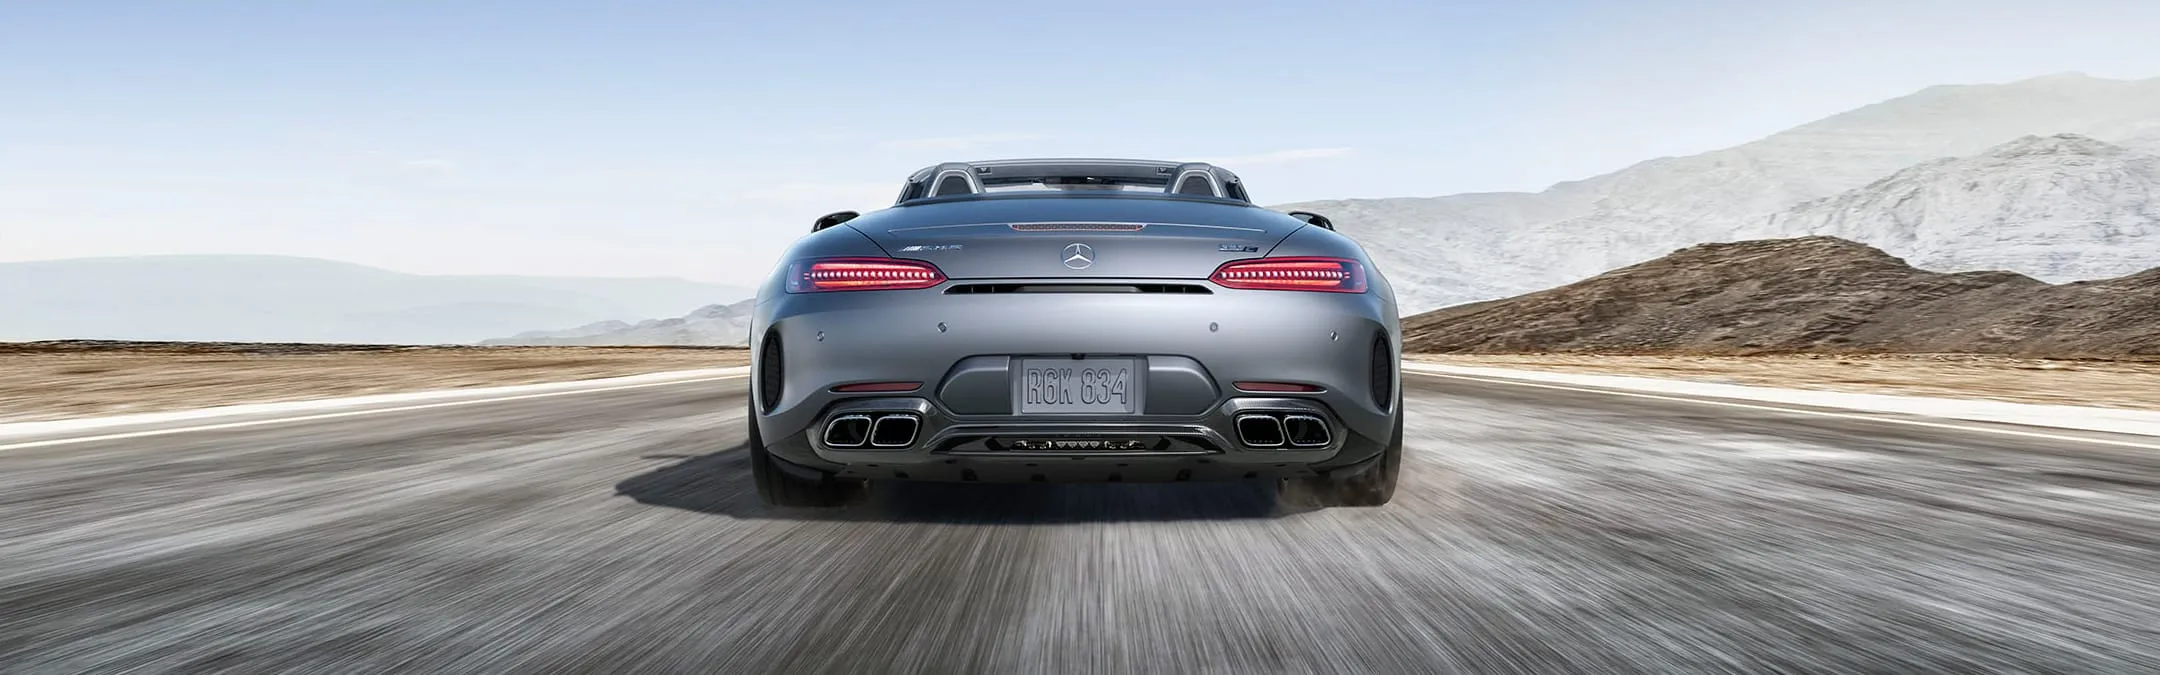 Mercedes Amg Gt Roadster High Performance Sports Car